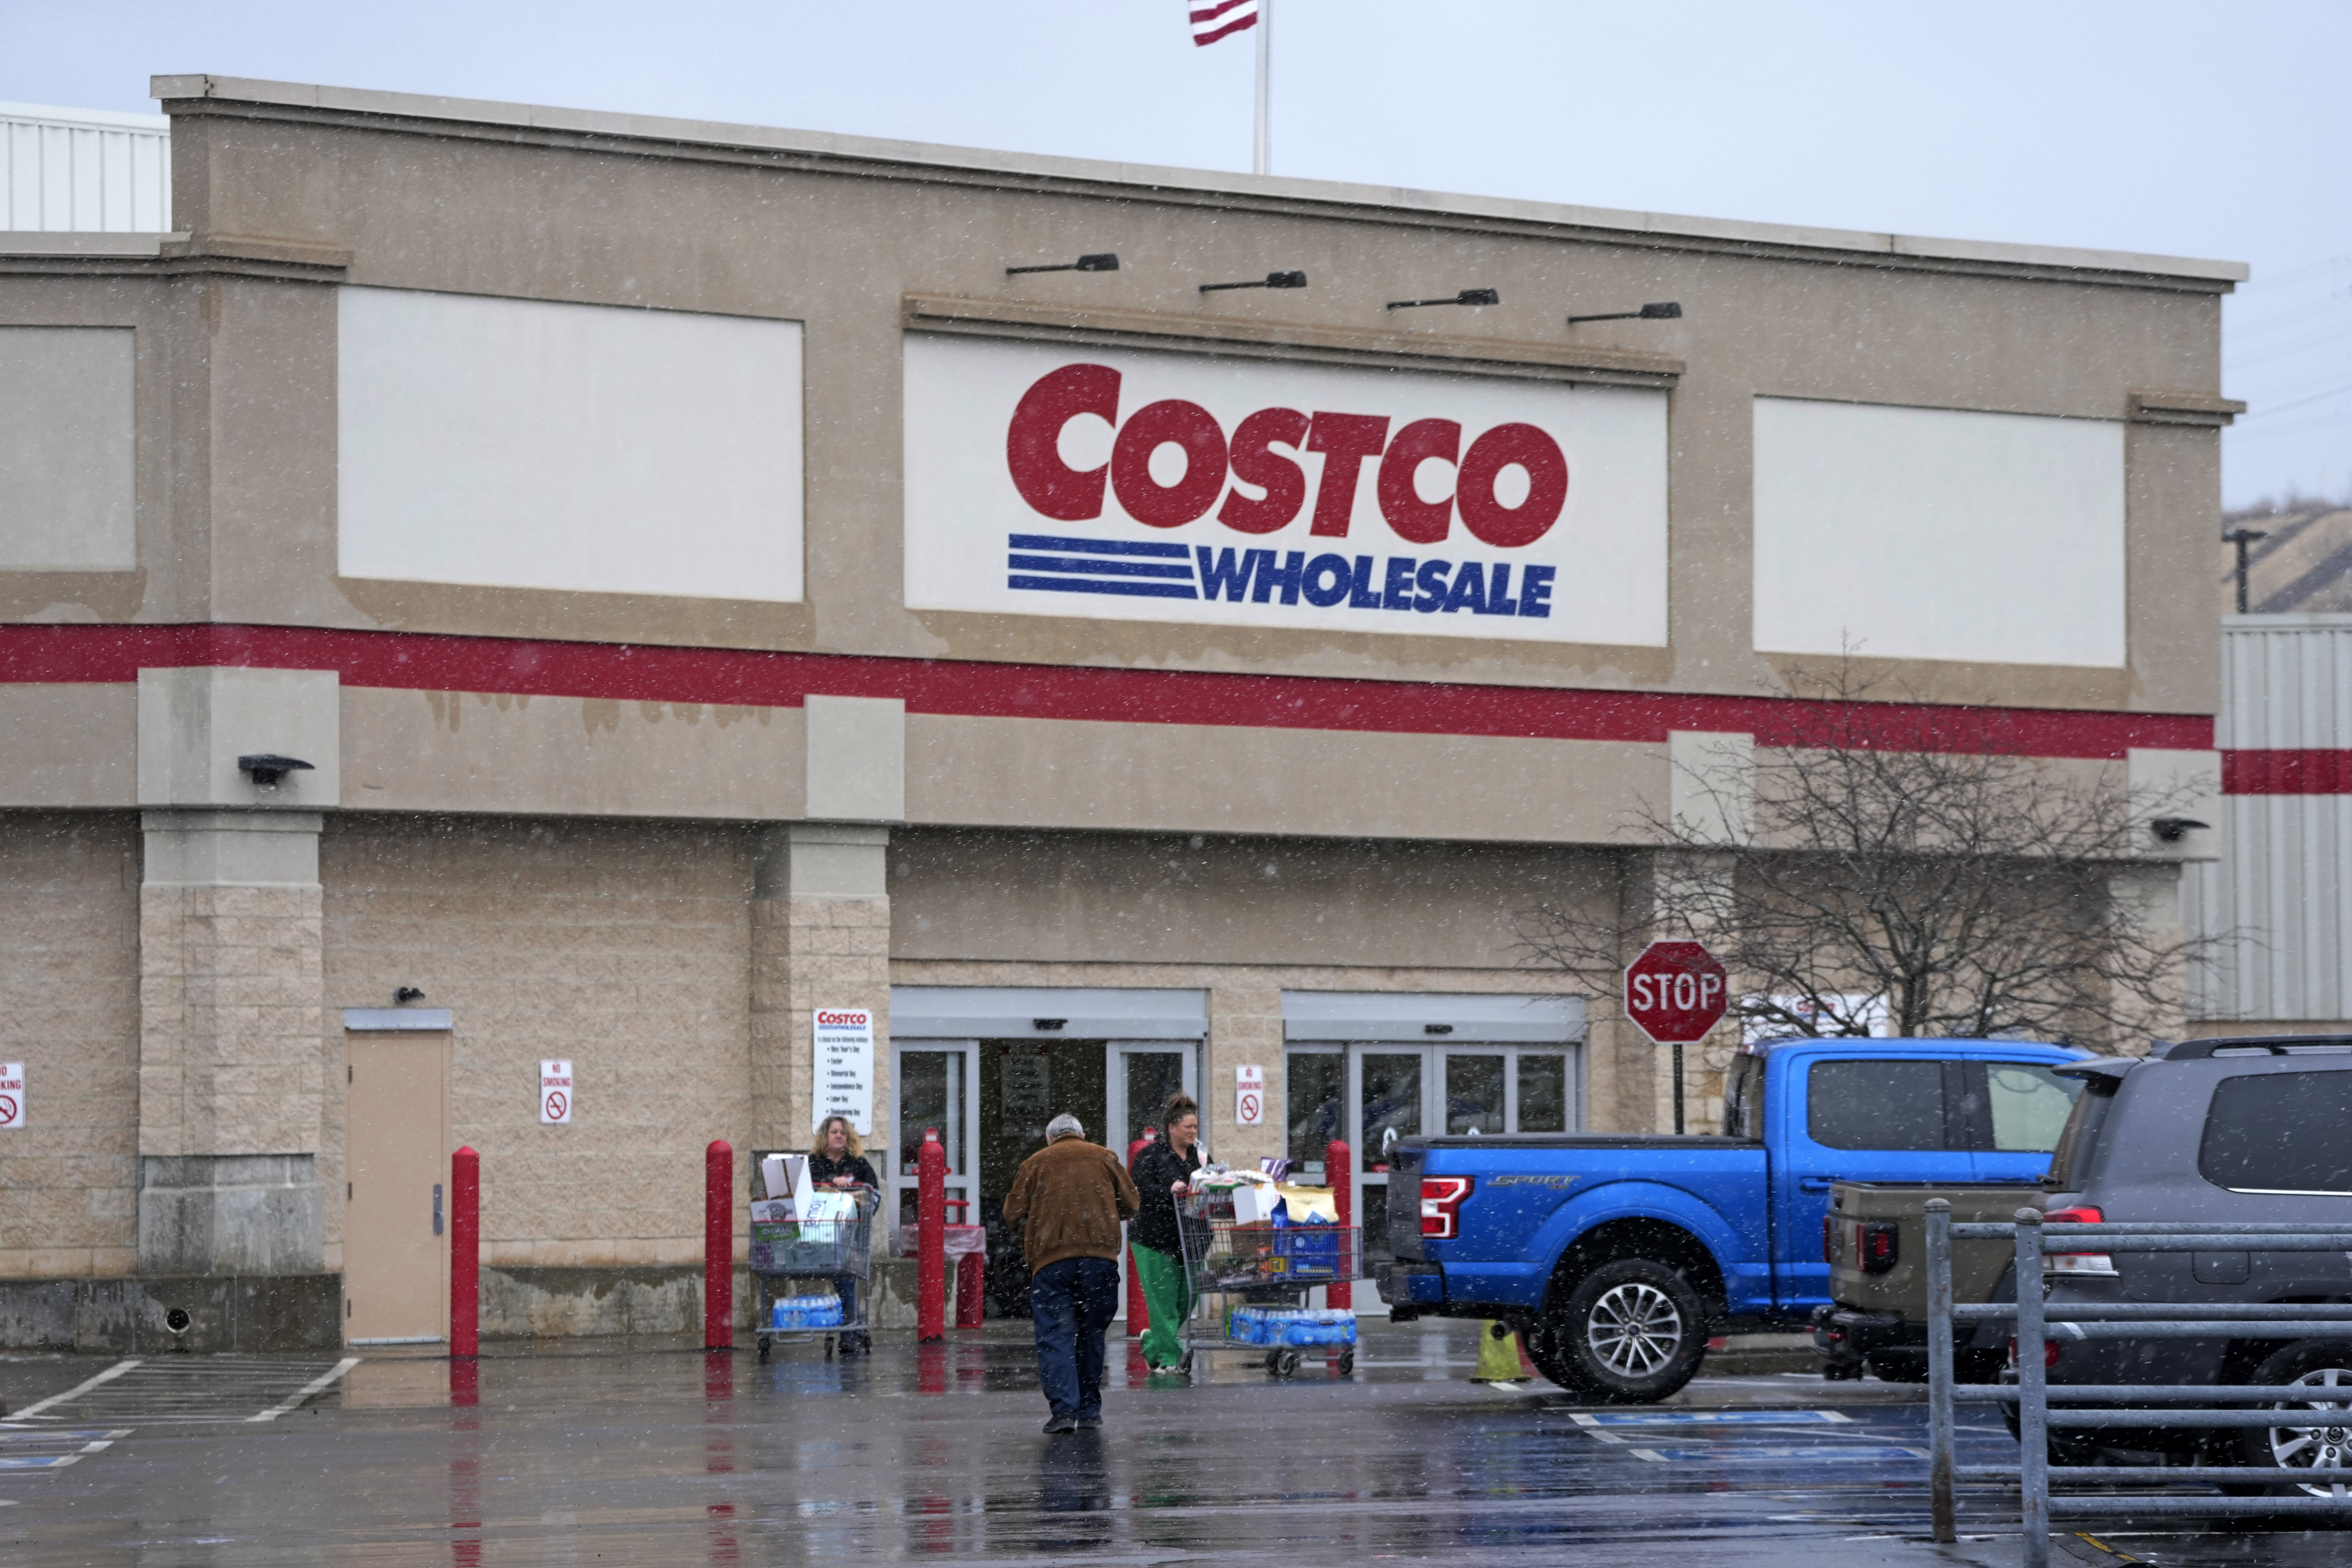 With Little Rock outlet, Costco plans entry into Arkansas